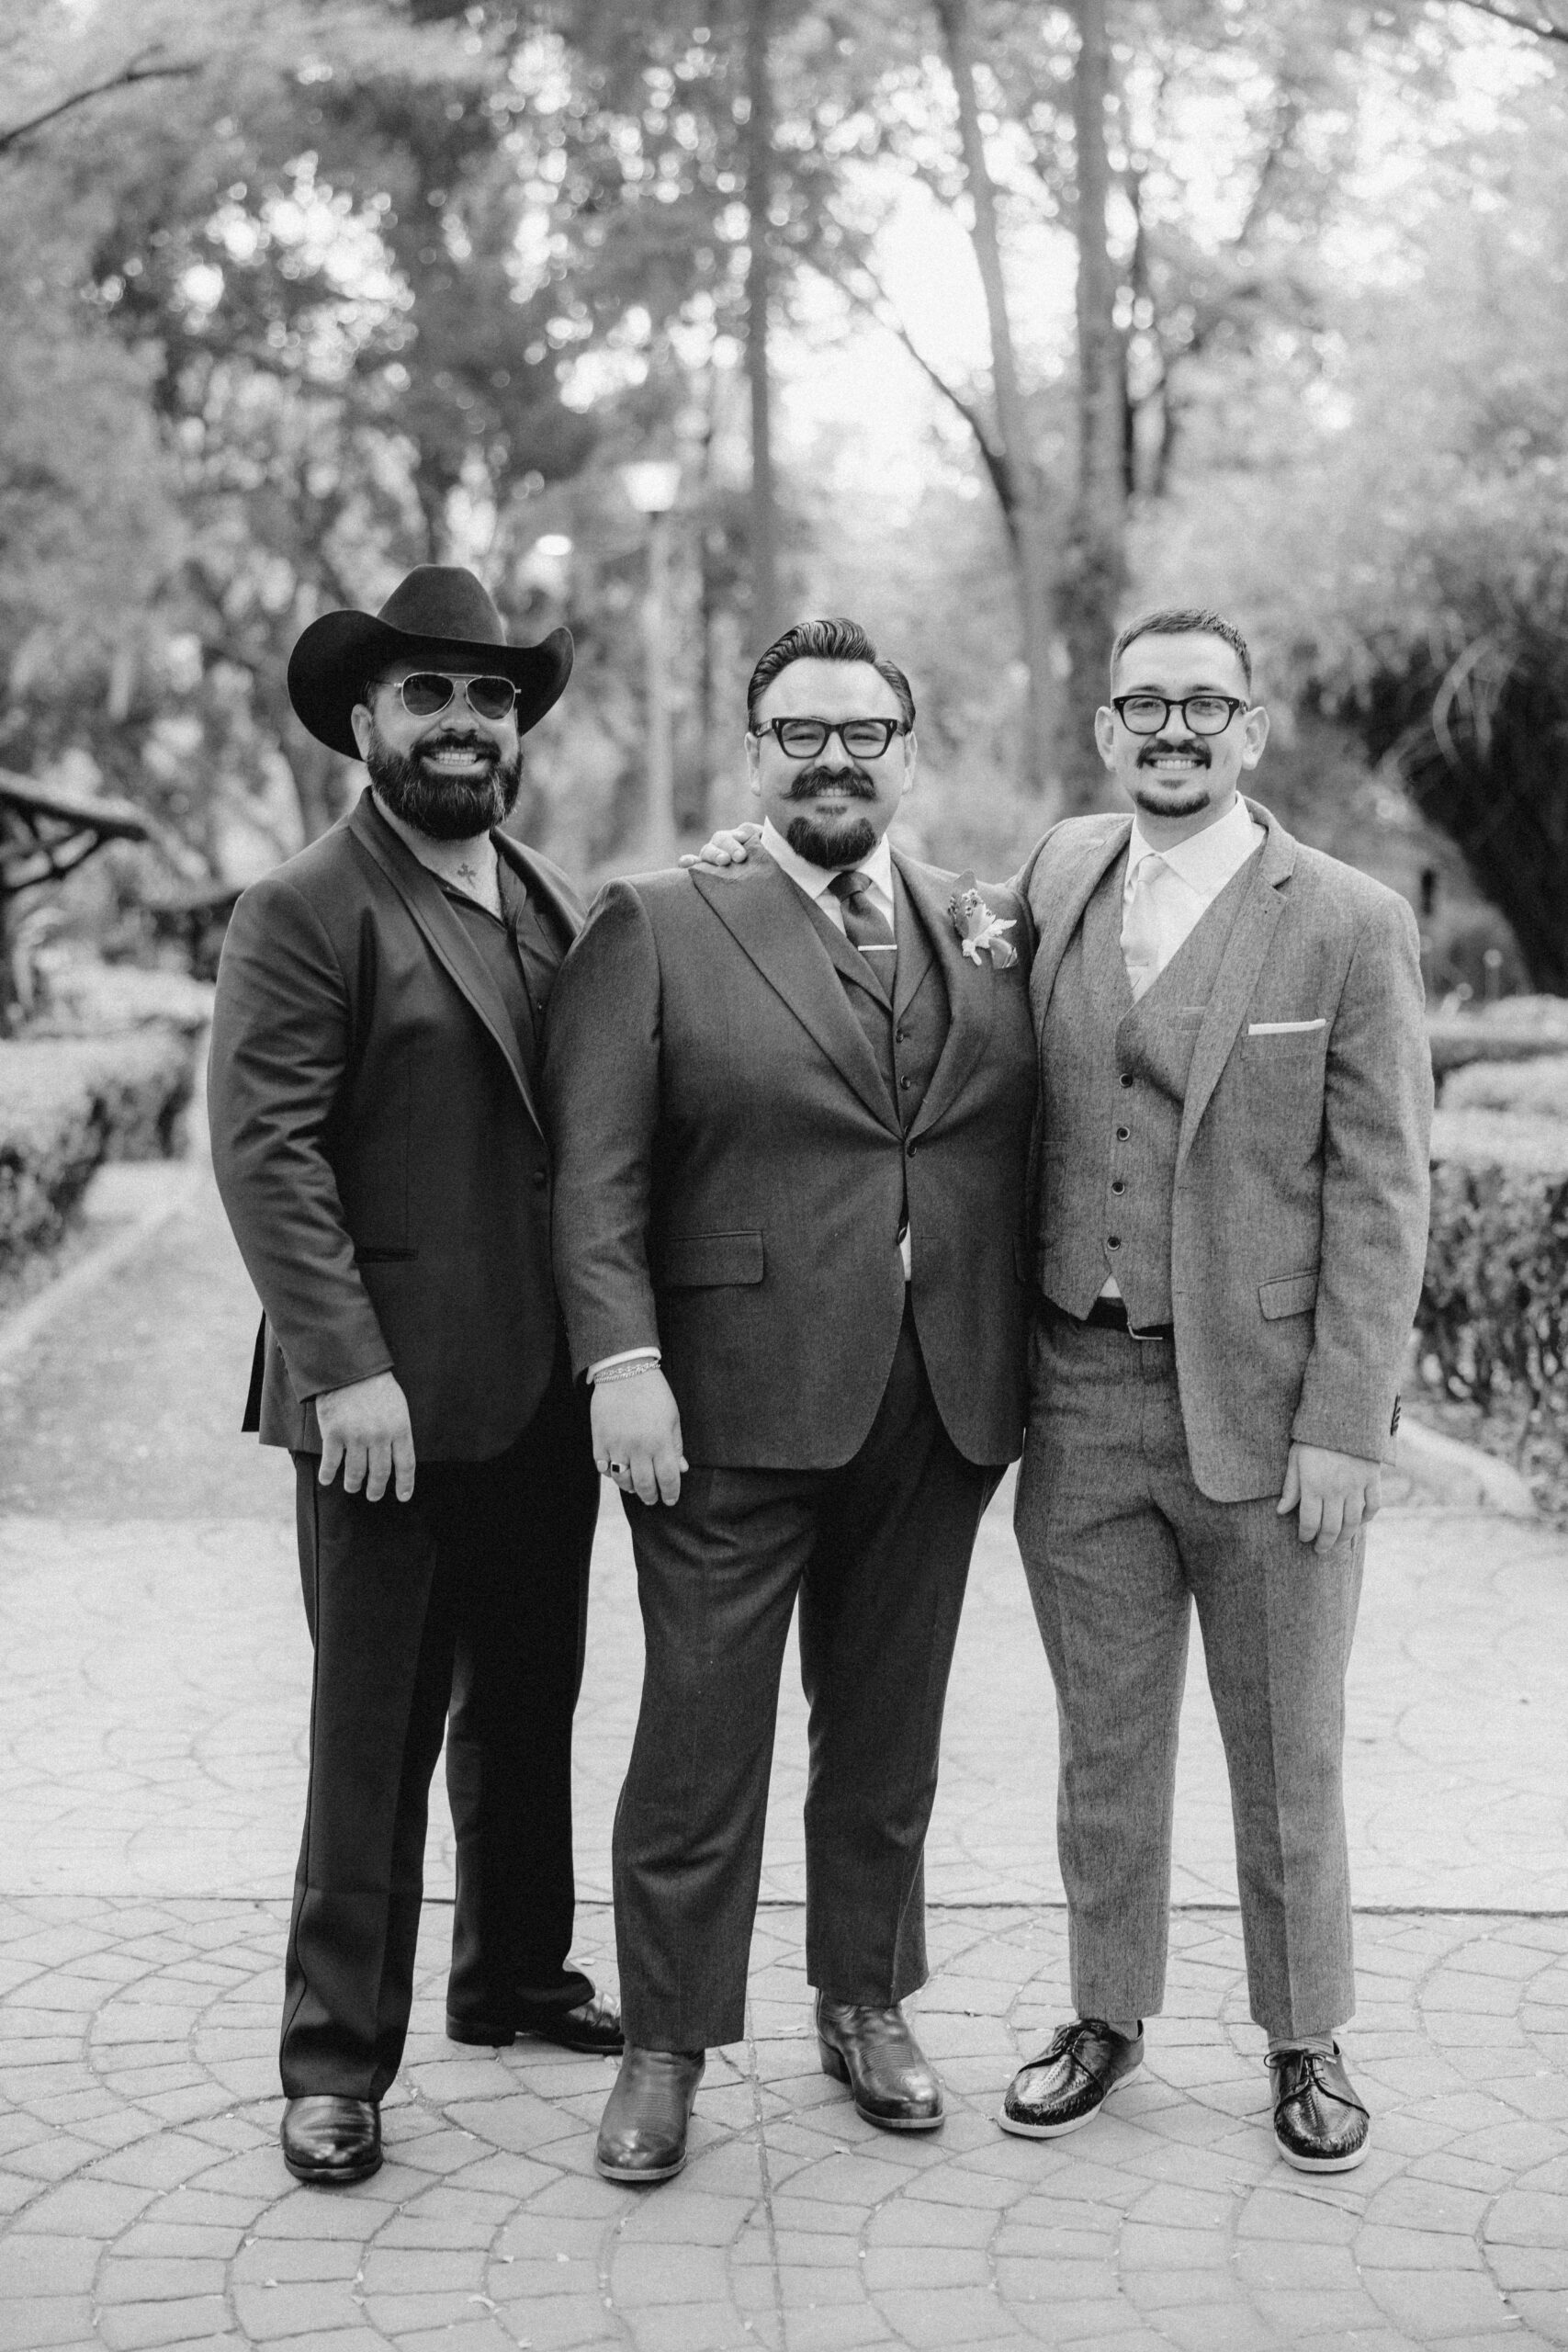 The groom poses with two of his groomsmen outside her Sobremesa wedding venue